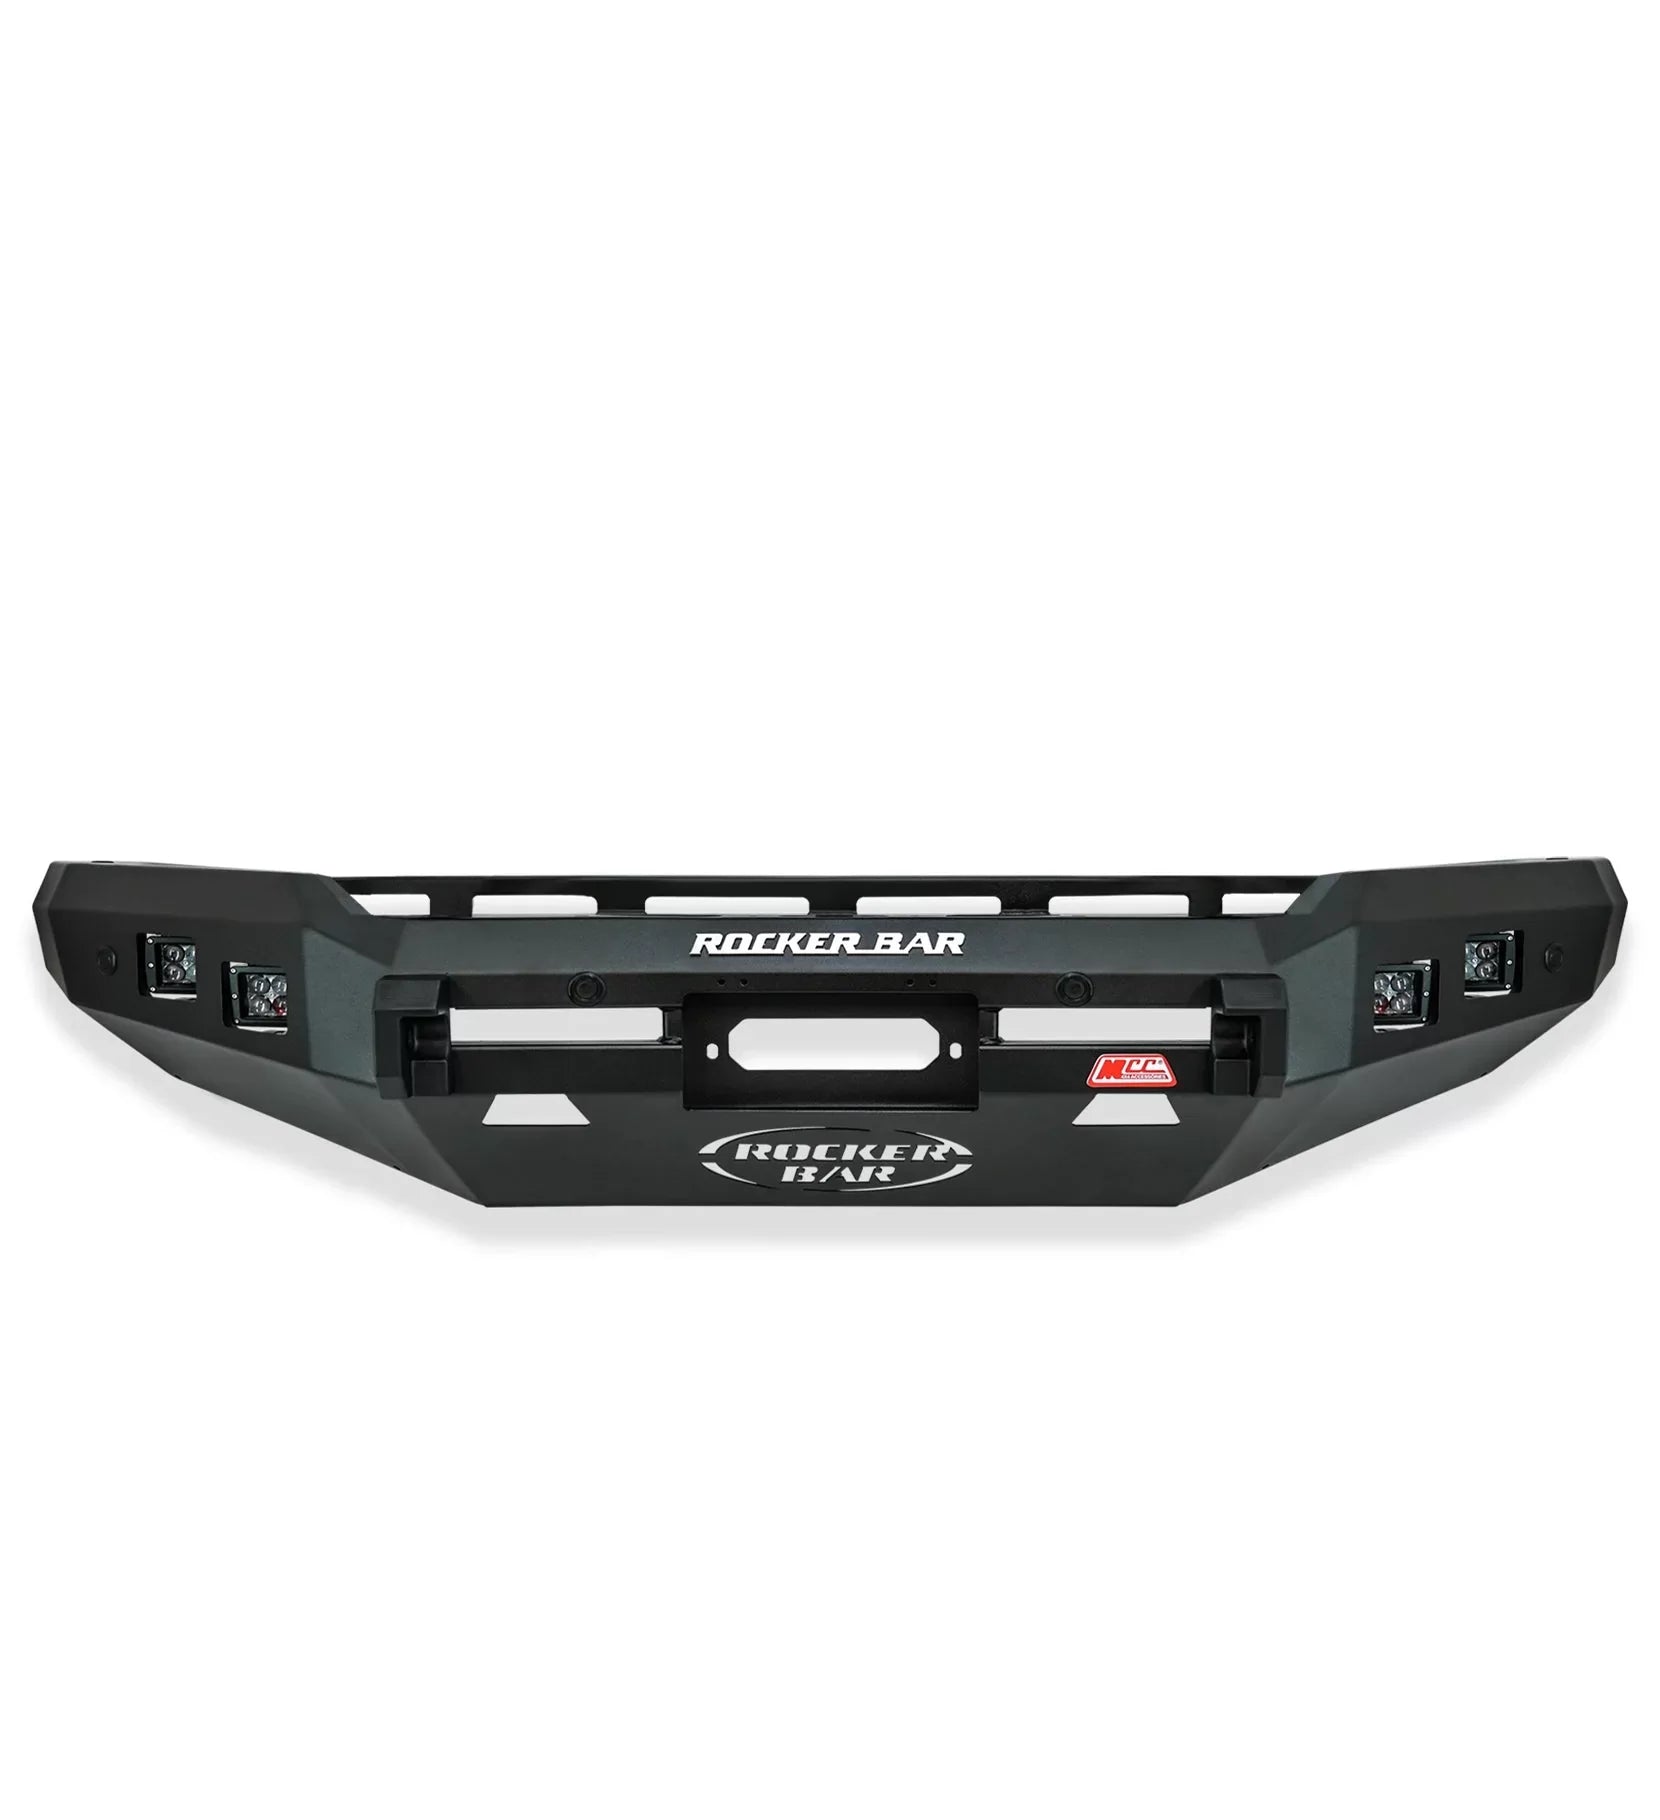 Colorado Rc 08-12 078-01sq No Loop Rocker Bar Square Light + Bracket + Underprotection Plate If Available